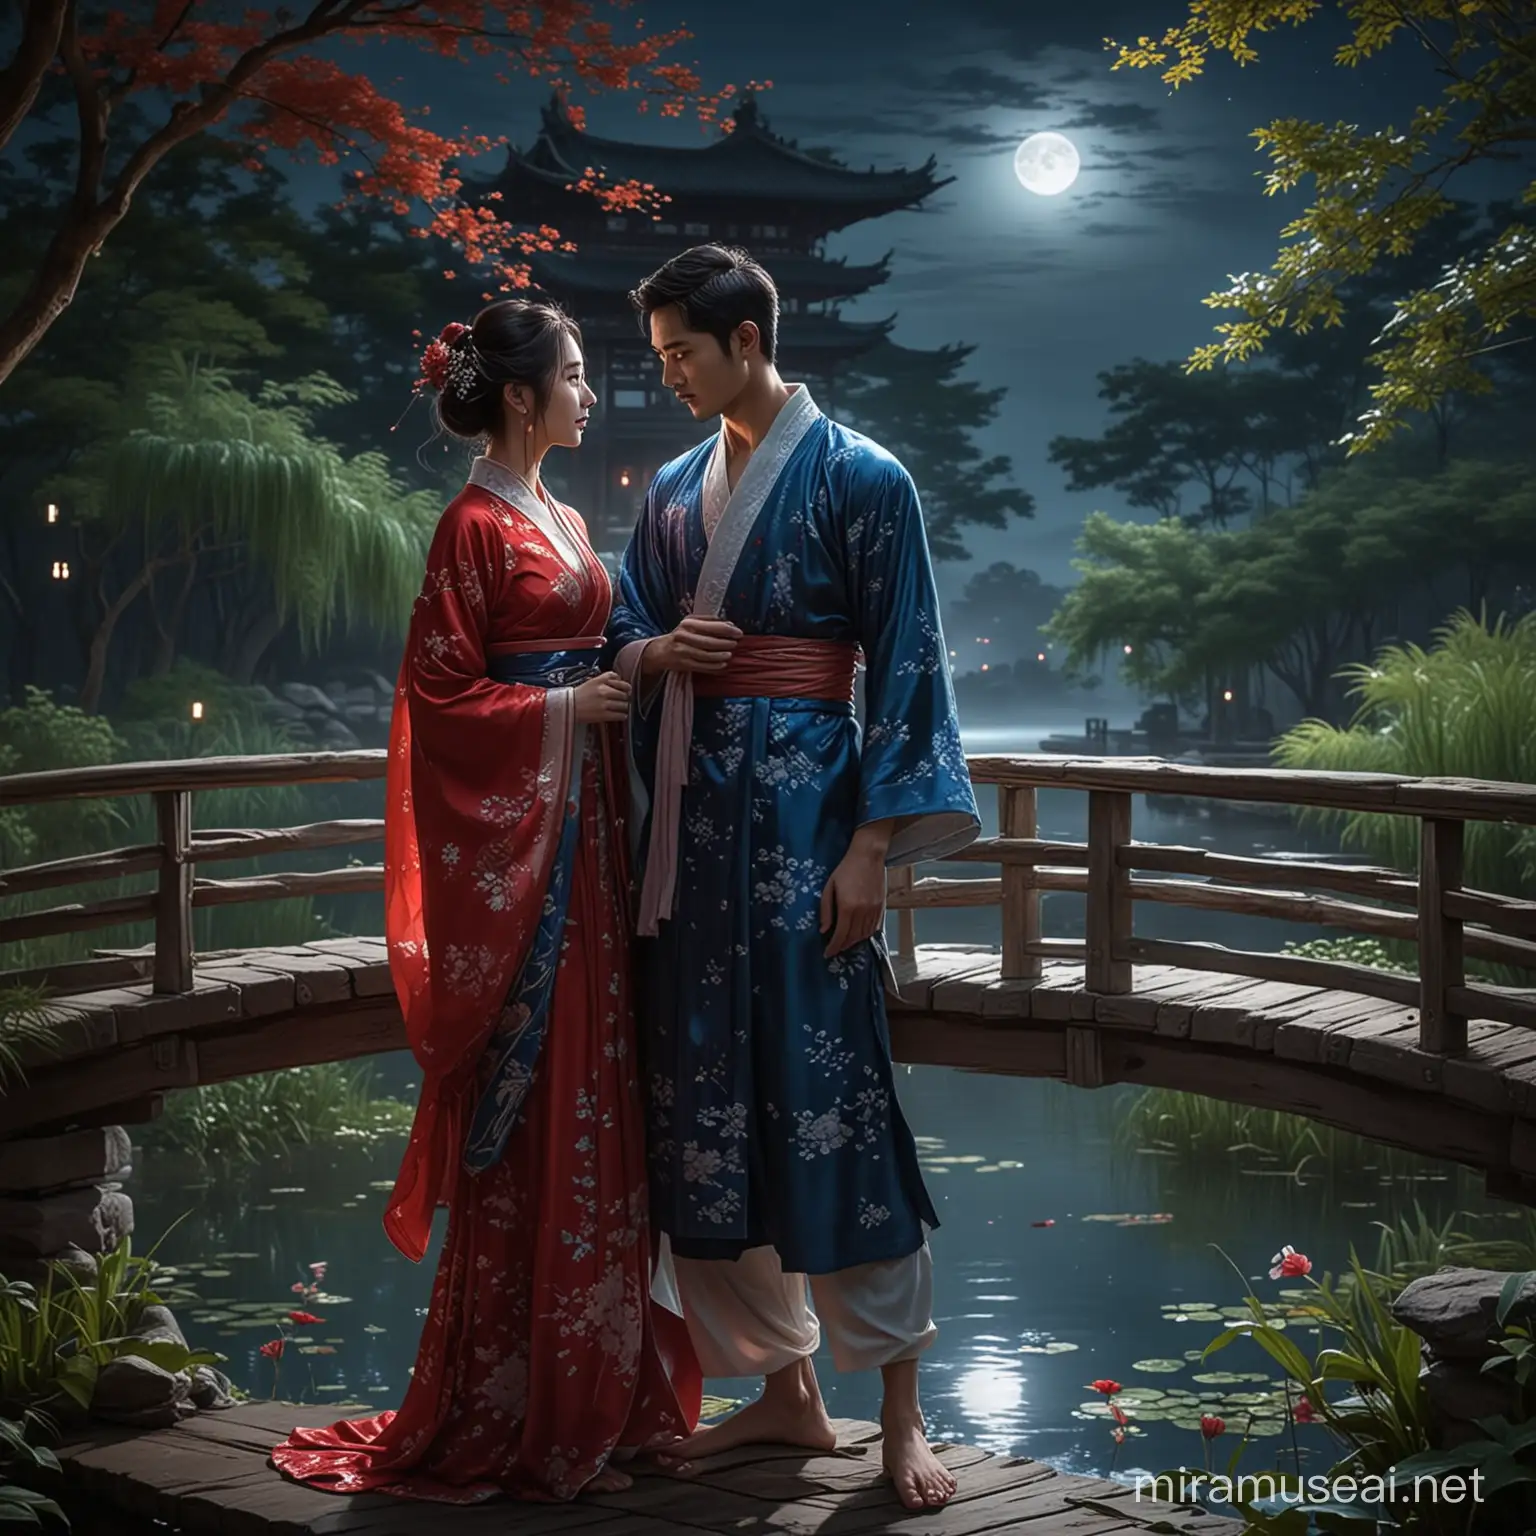 Romantic Moonlit Encounter Chinese Couple Embracing by Pond